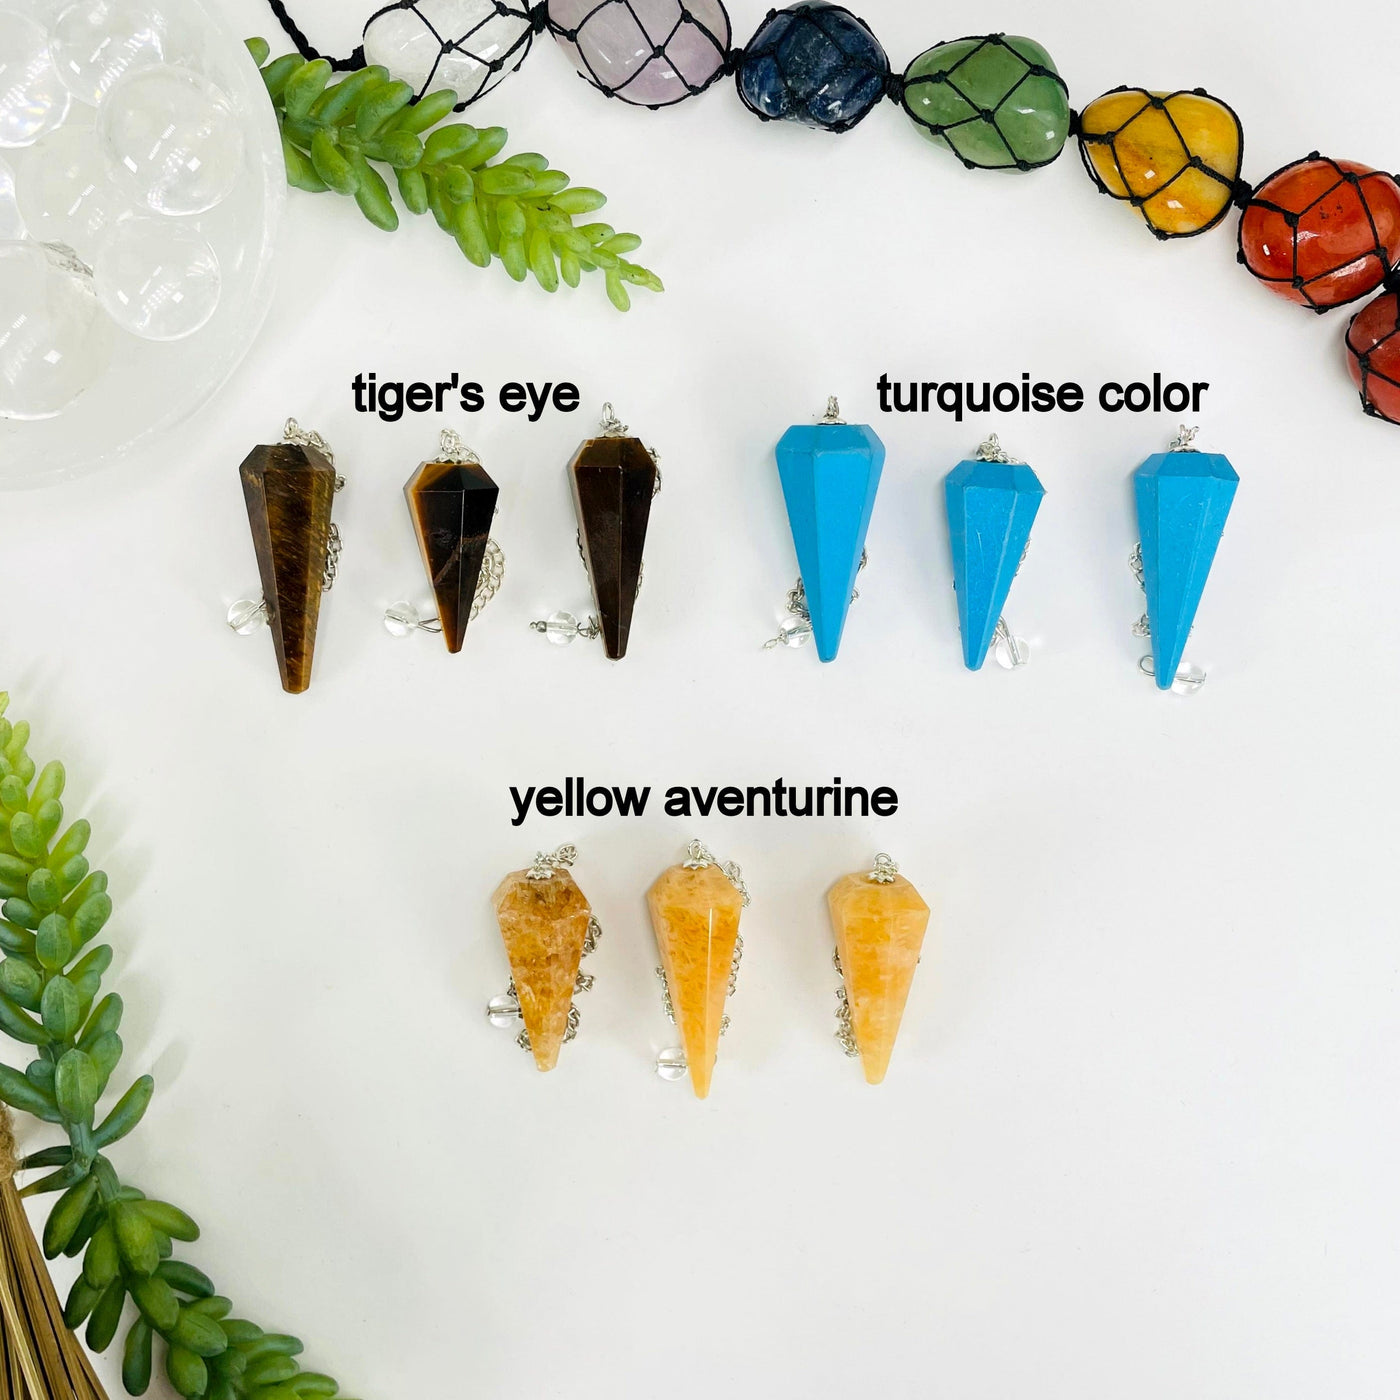 three tiger's eye, turquoise color, and yellow aventurine pendulum pendants on white background for possible variations